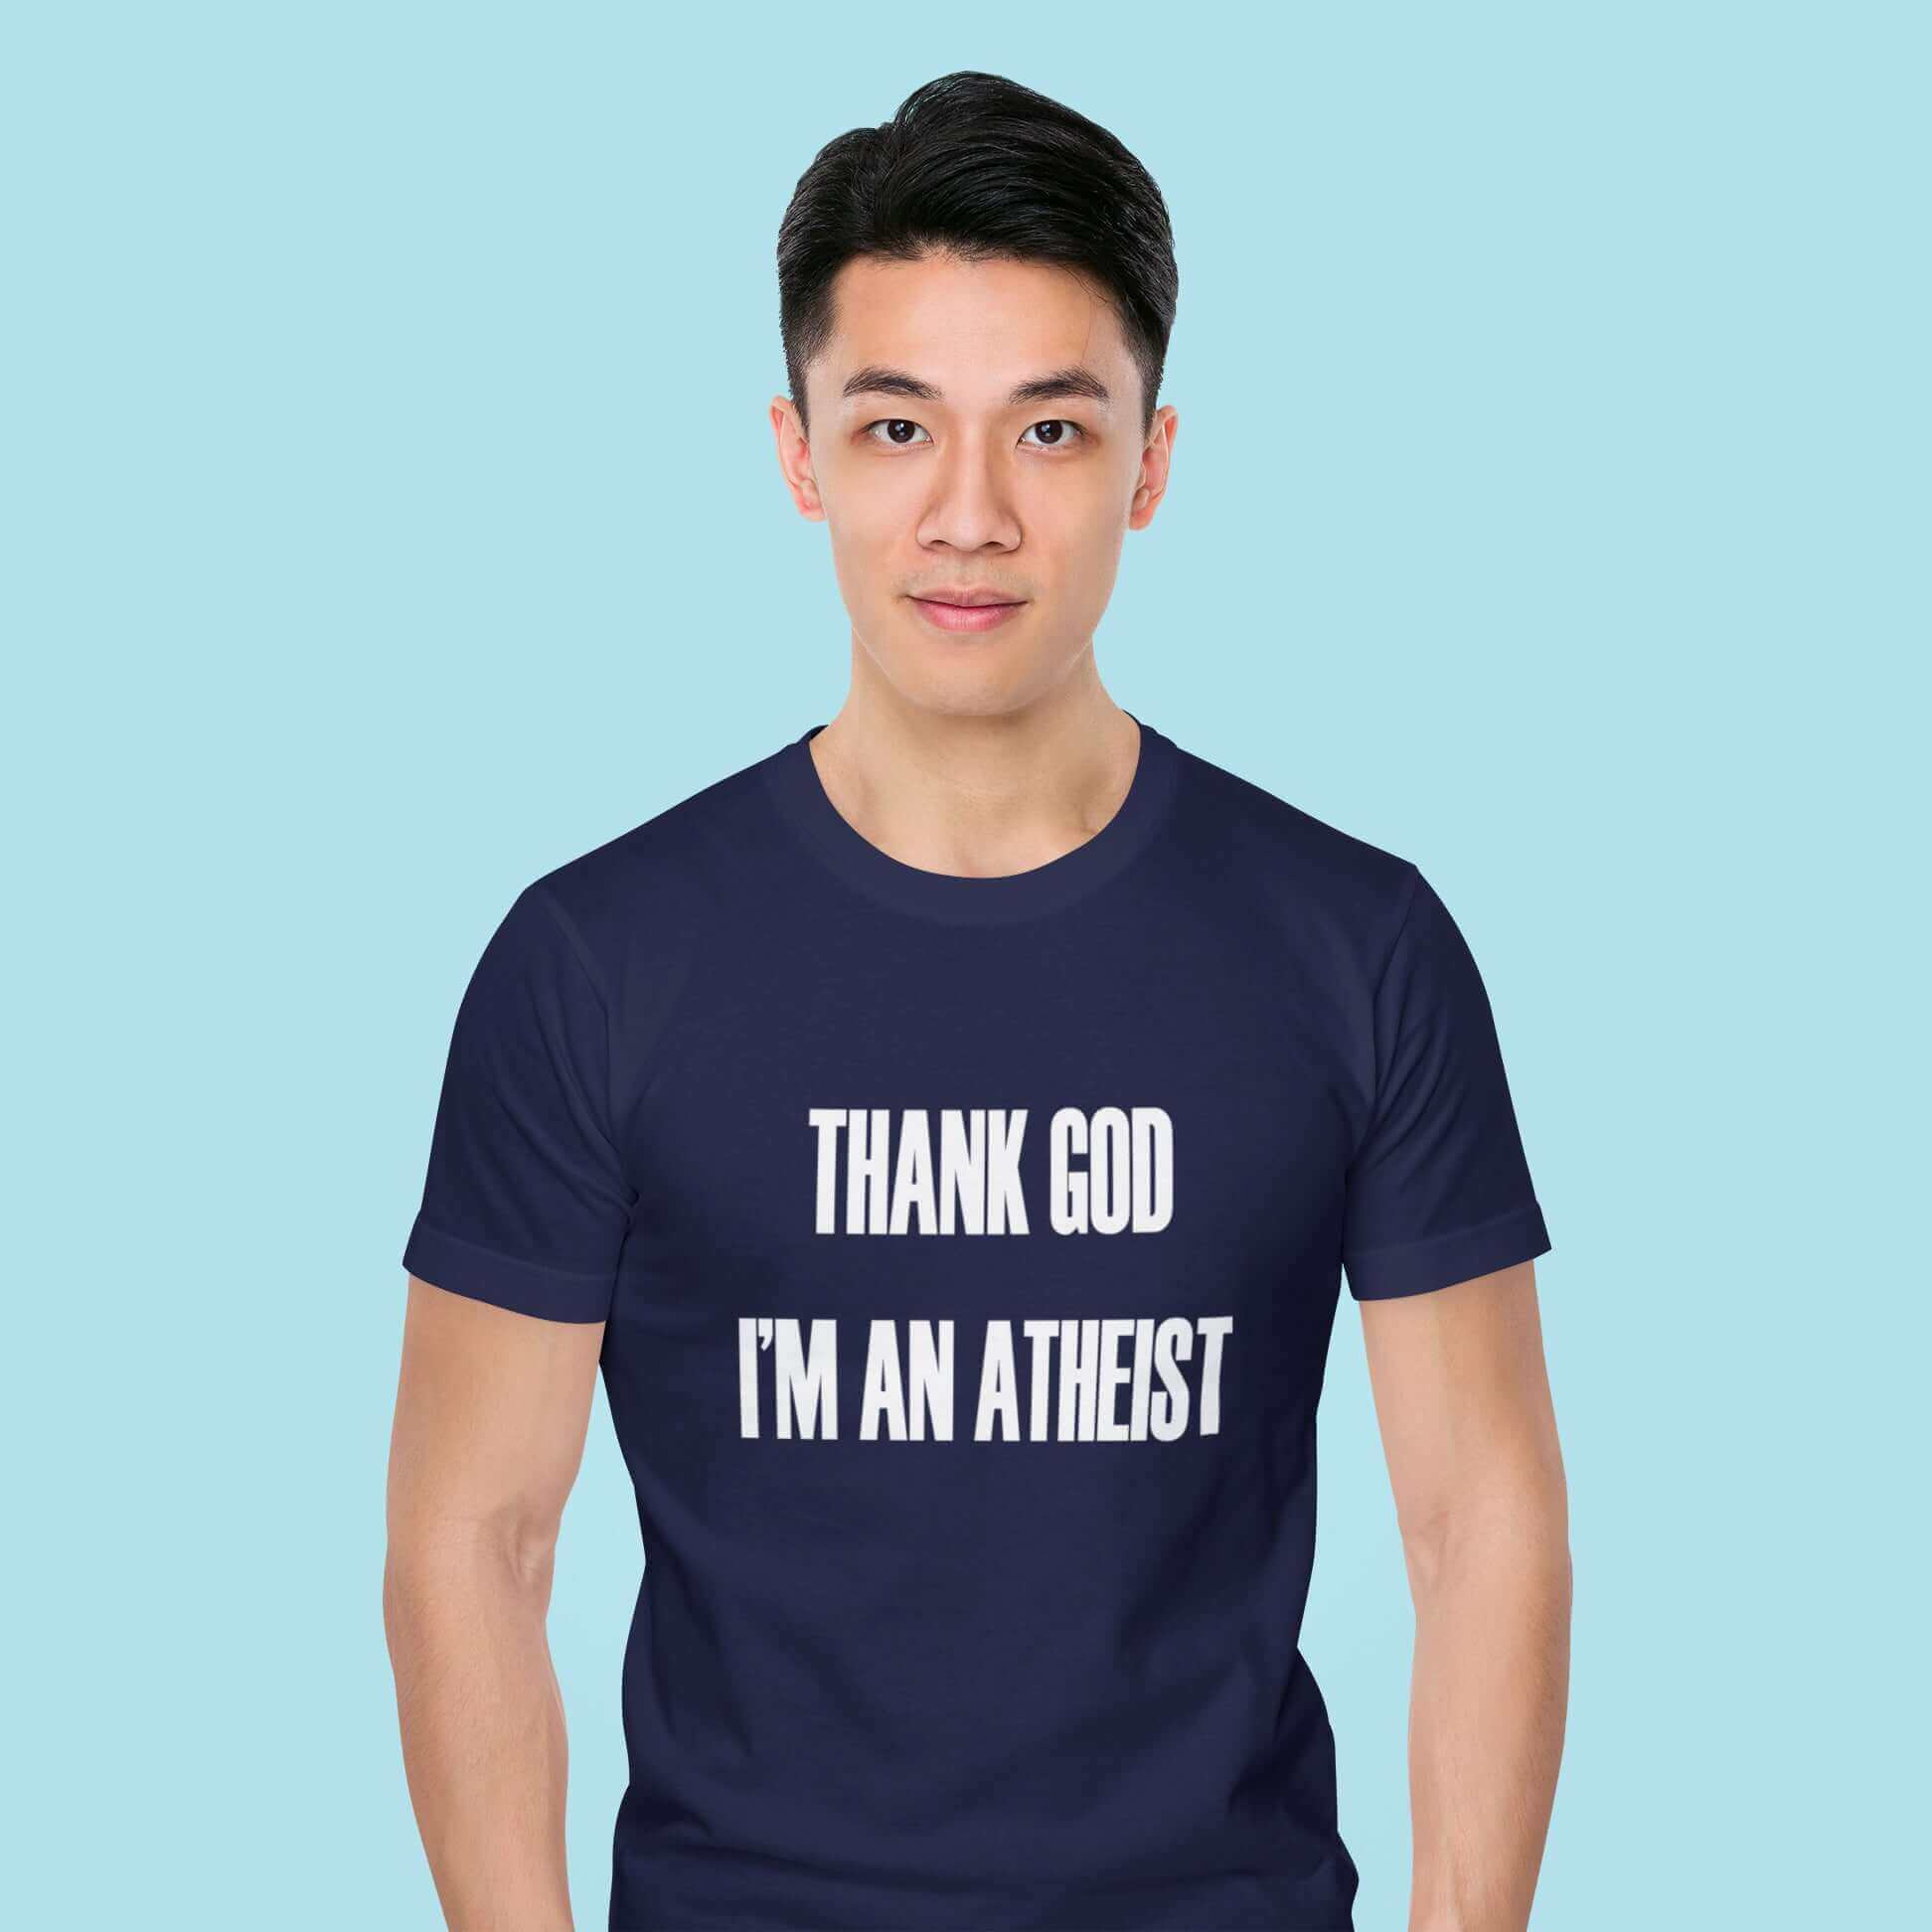 Man wearing navy blue t-shirt with Thank God I'm an atheist printed on the front.